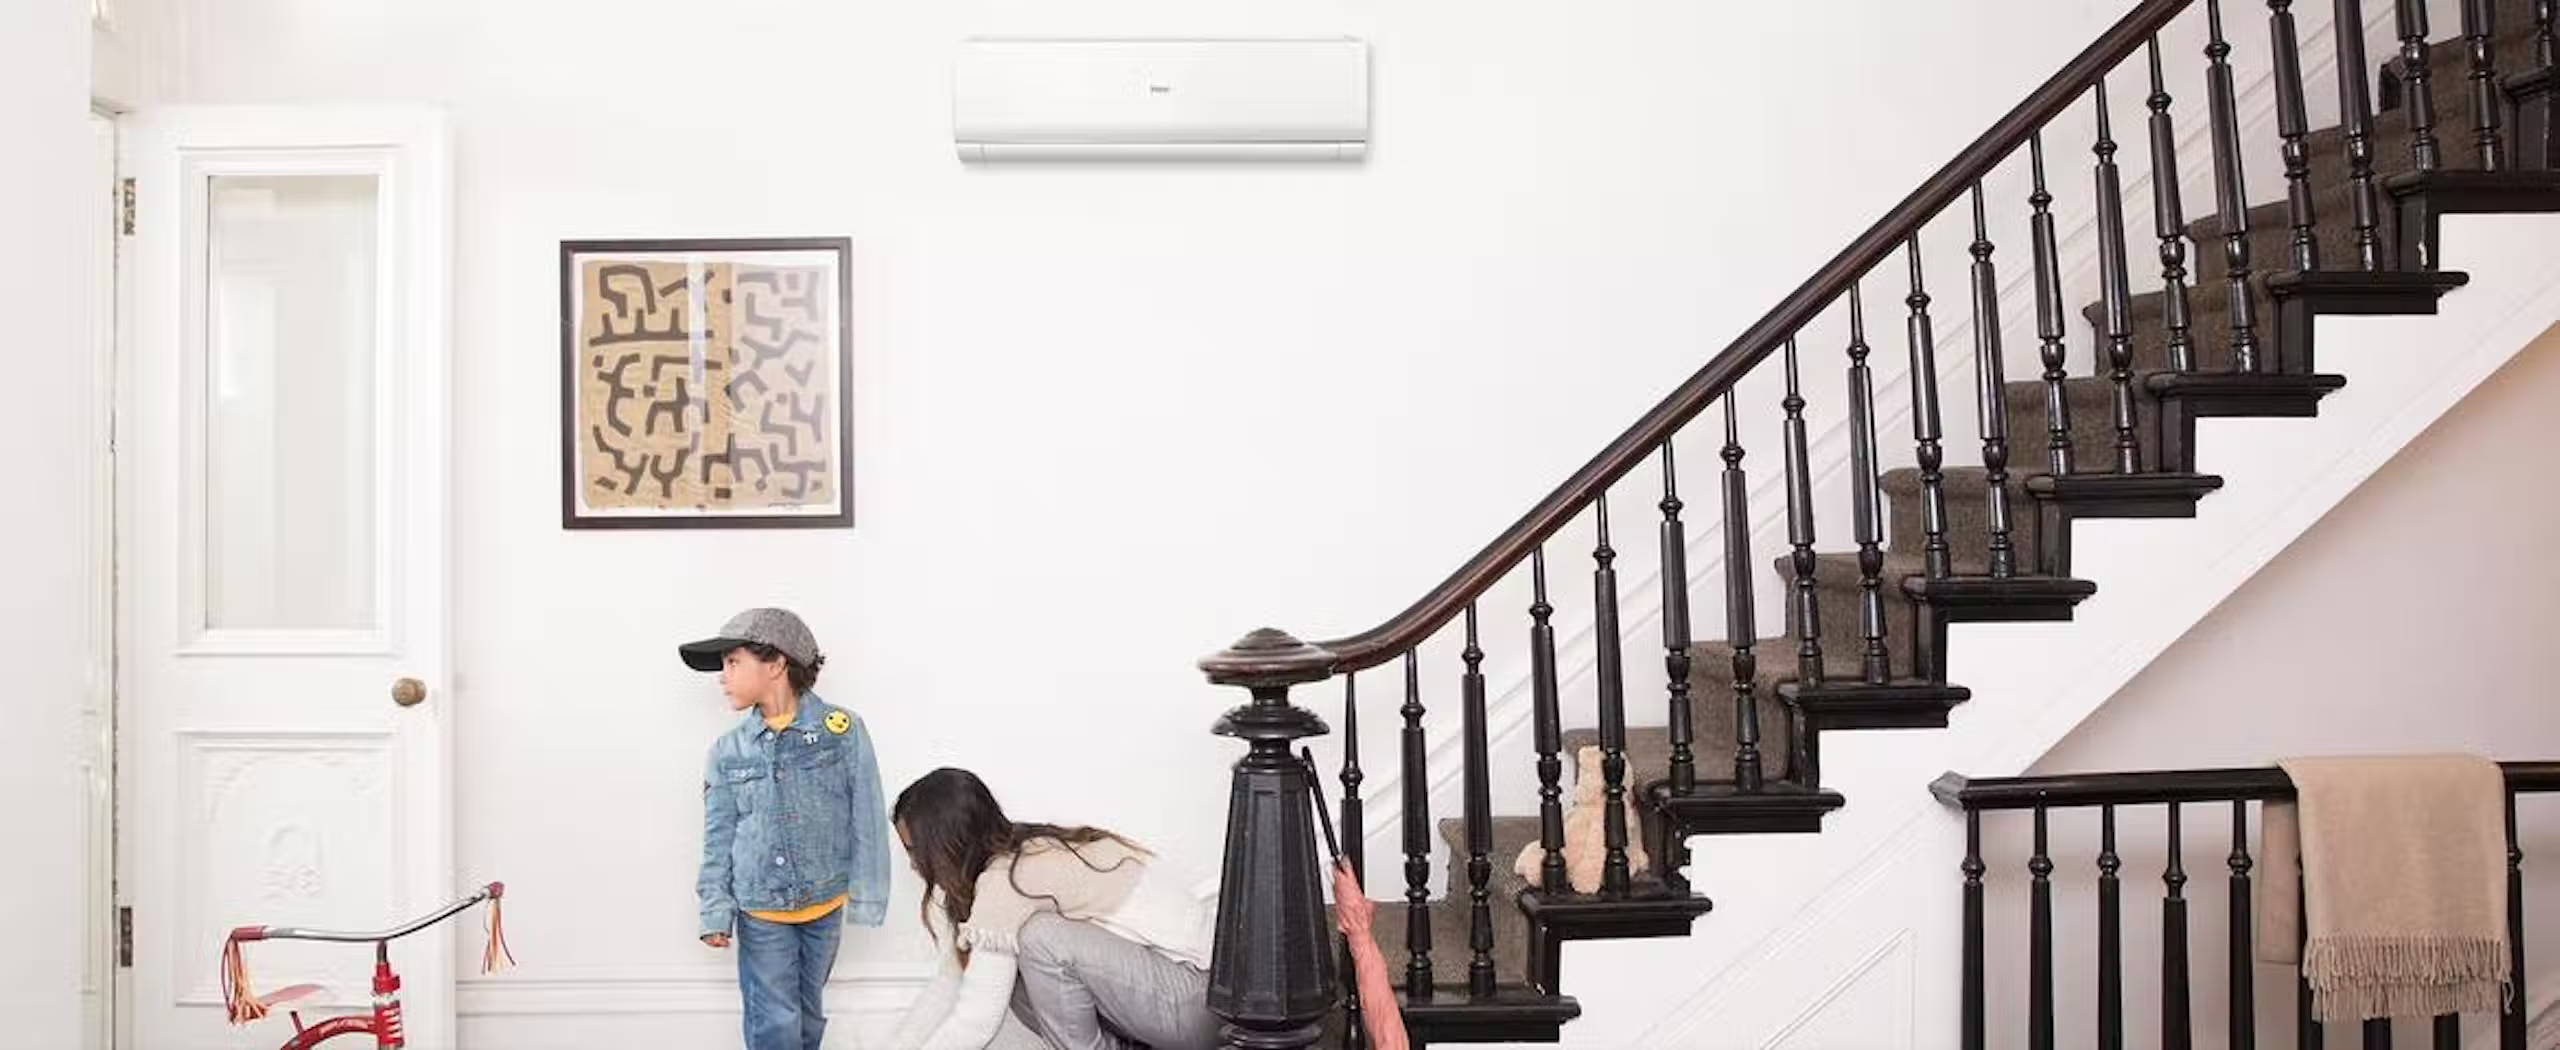 Photo of a Haier ductless wall mount mini split air conditioner installed in foyer of home.